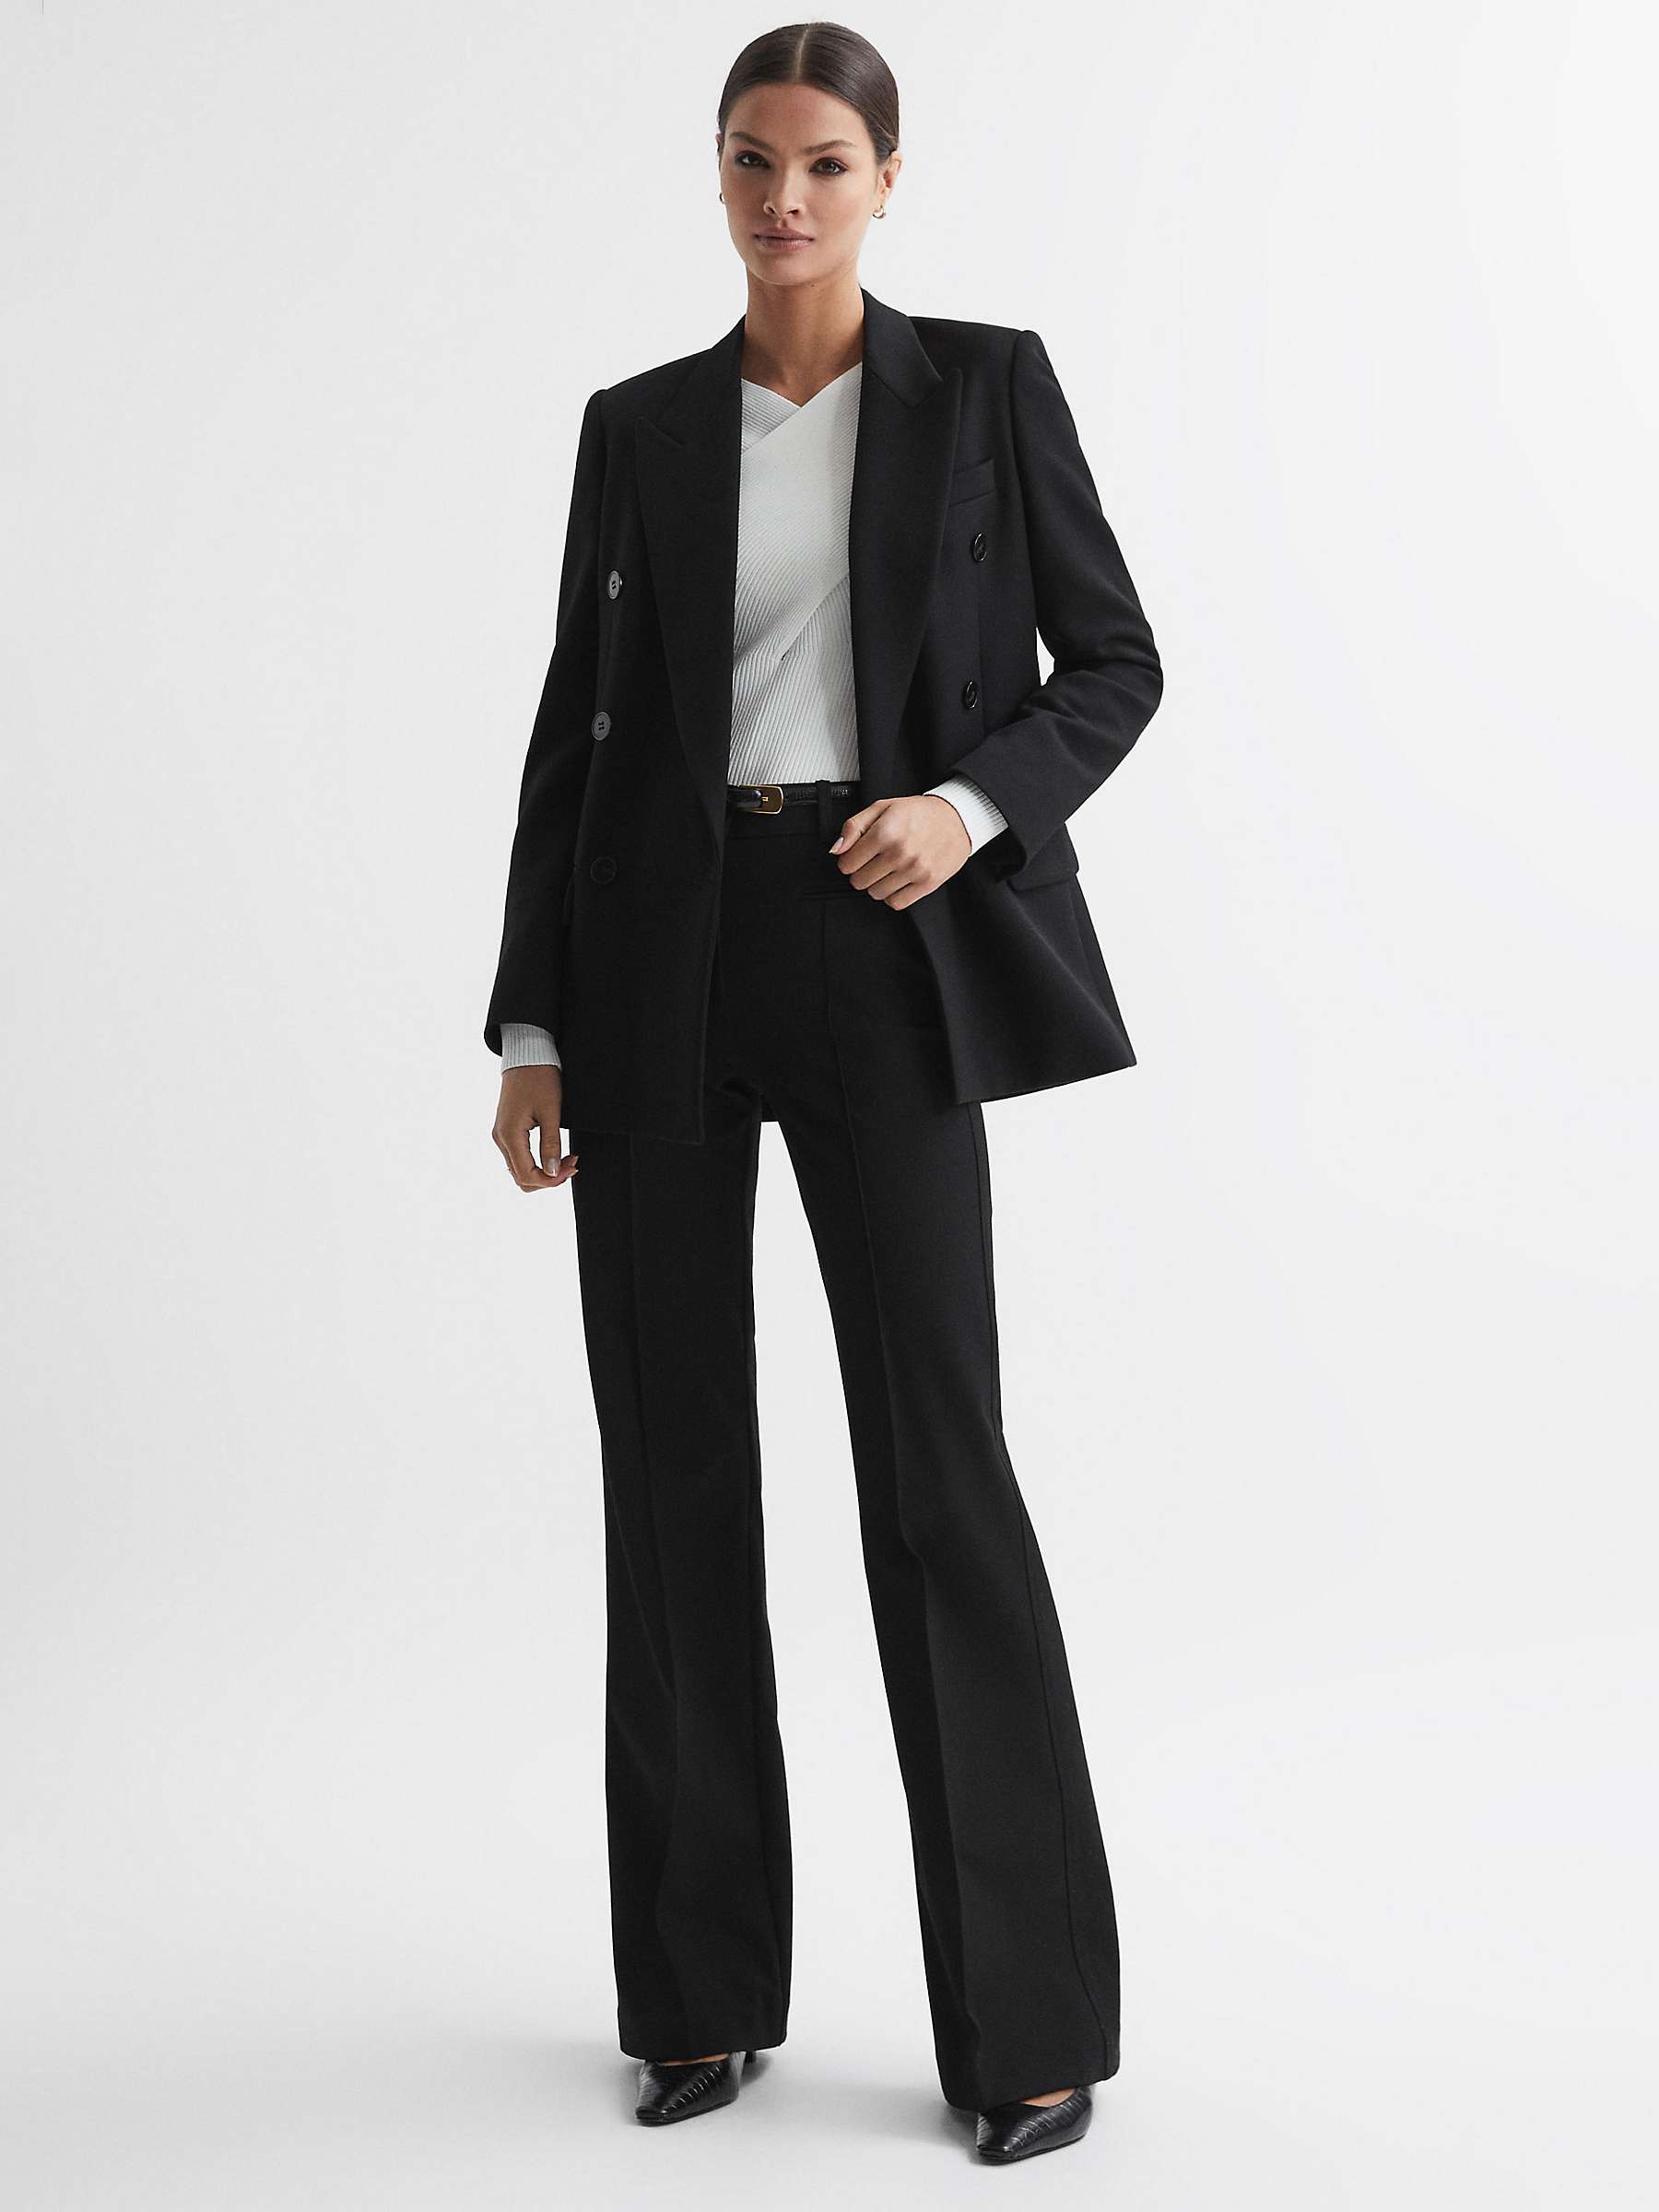 Buy Reiss Petite Claude Flared Trousers Online at johnlewis.com